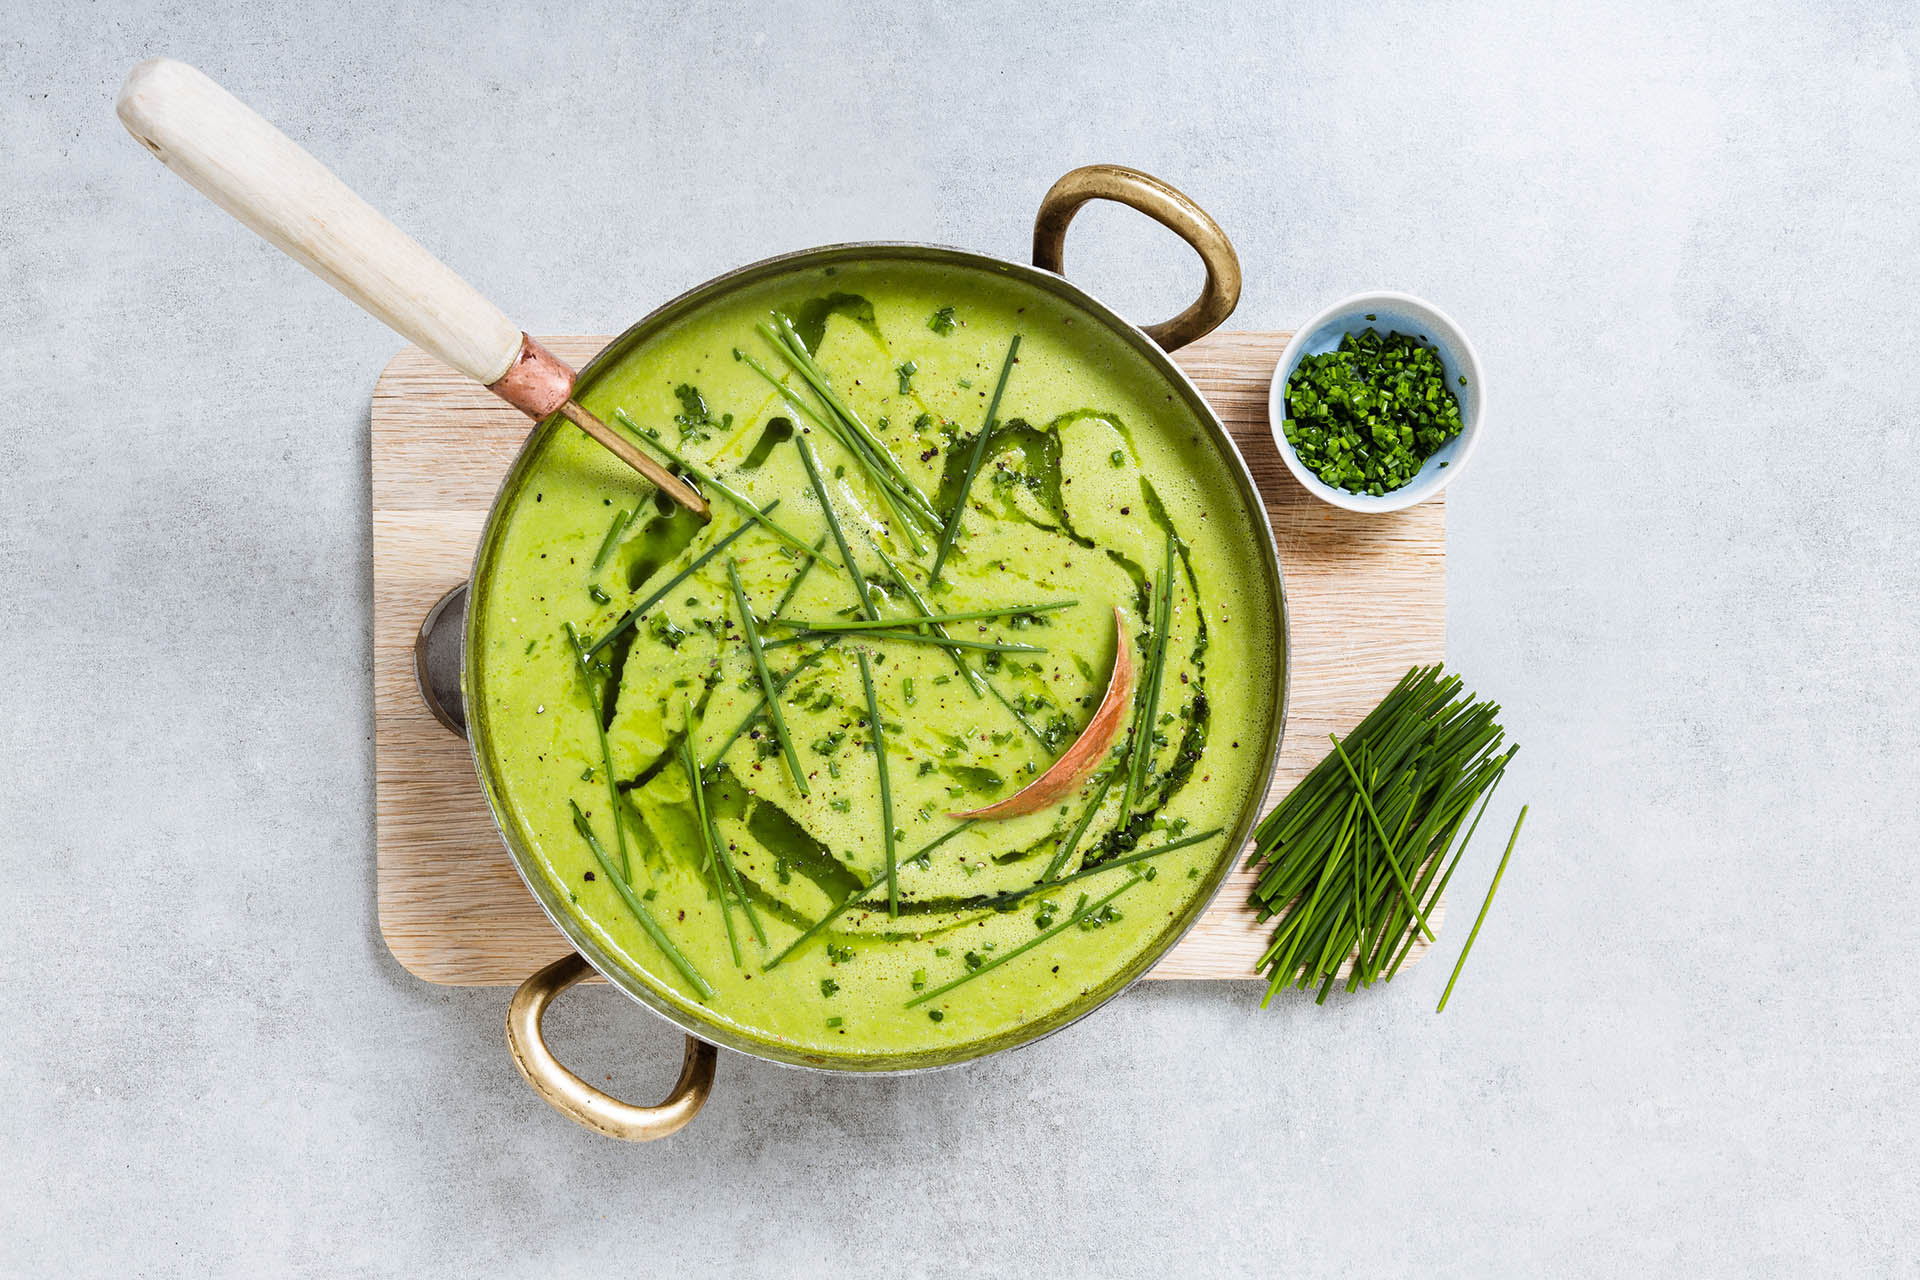 green soup in a pot with long strands of chives